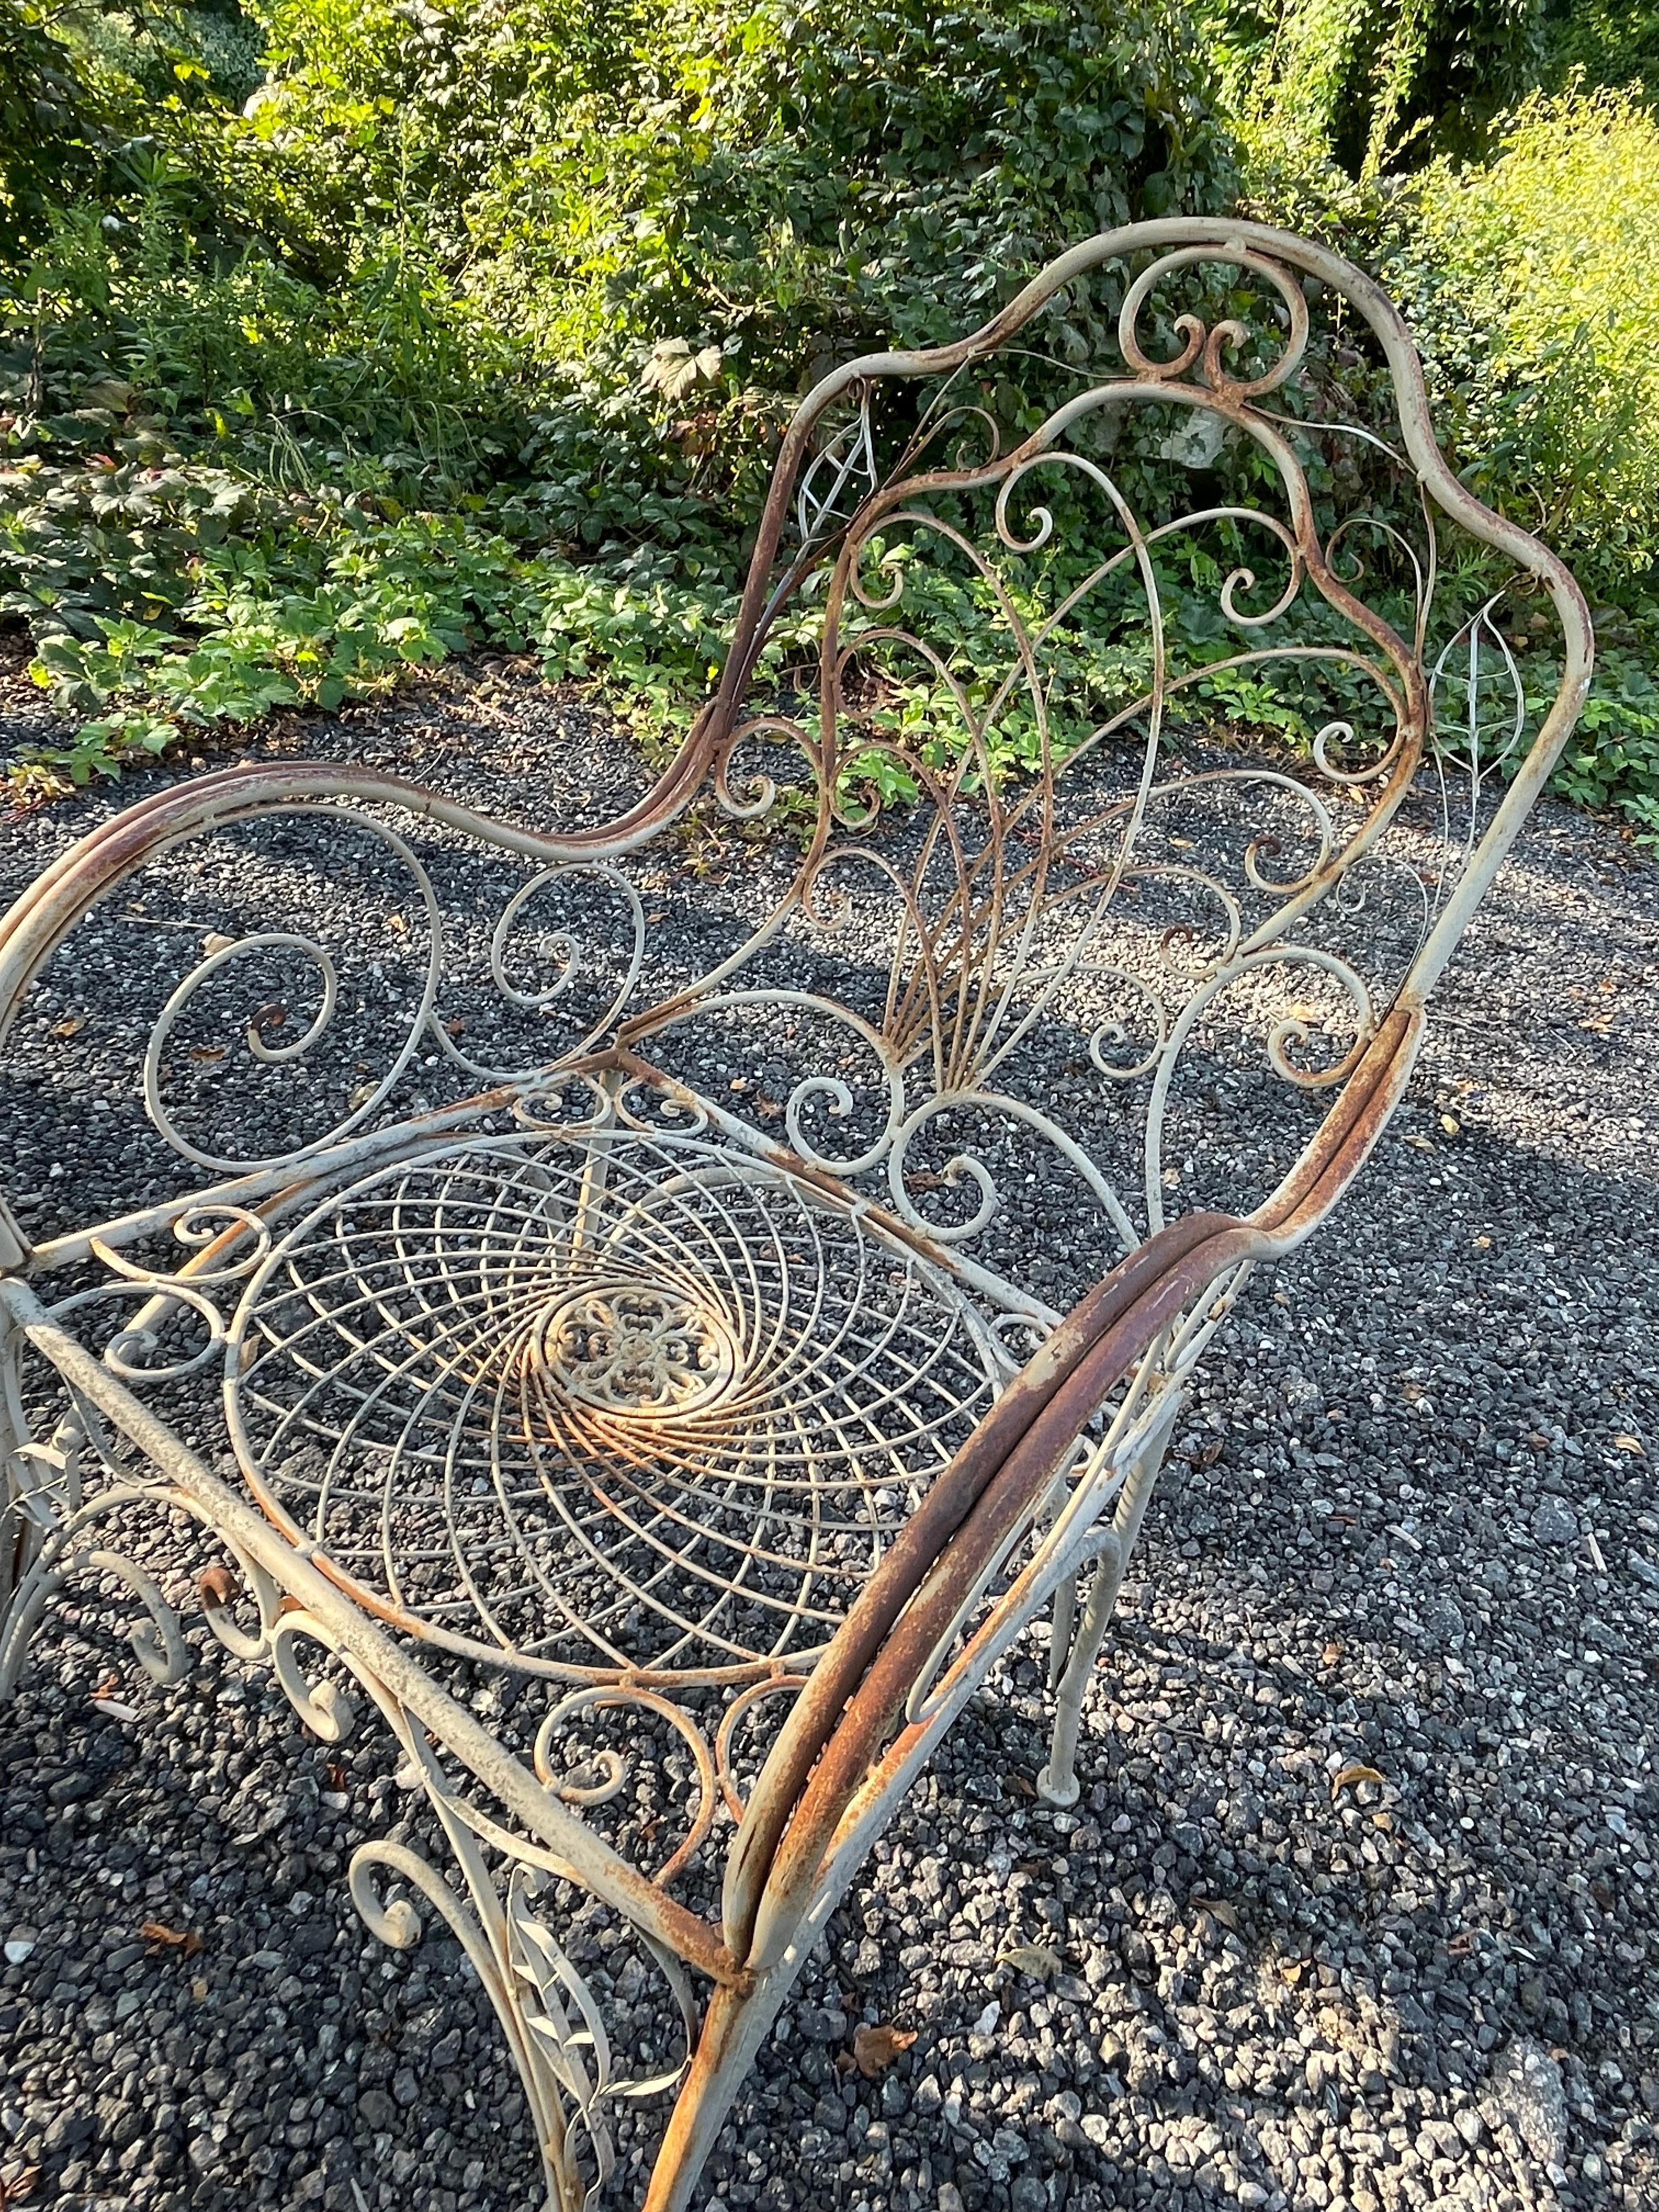 Available now for your enjoyment and ready to ship is a Vintage Wrought Iron Patio Set including a 4 Chairs and 36” Outdoor Patio Table.

This lovely Wrought Iron French Bistro Set is the perfect addition to any garden, terrace, or veranda. Enjoy a